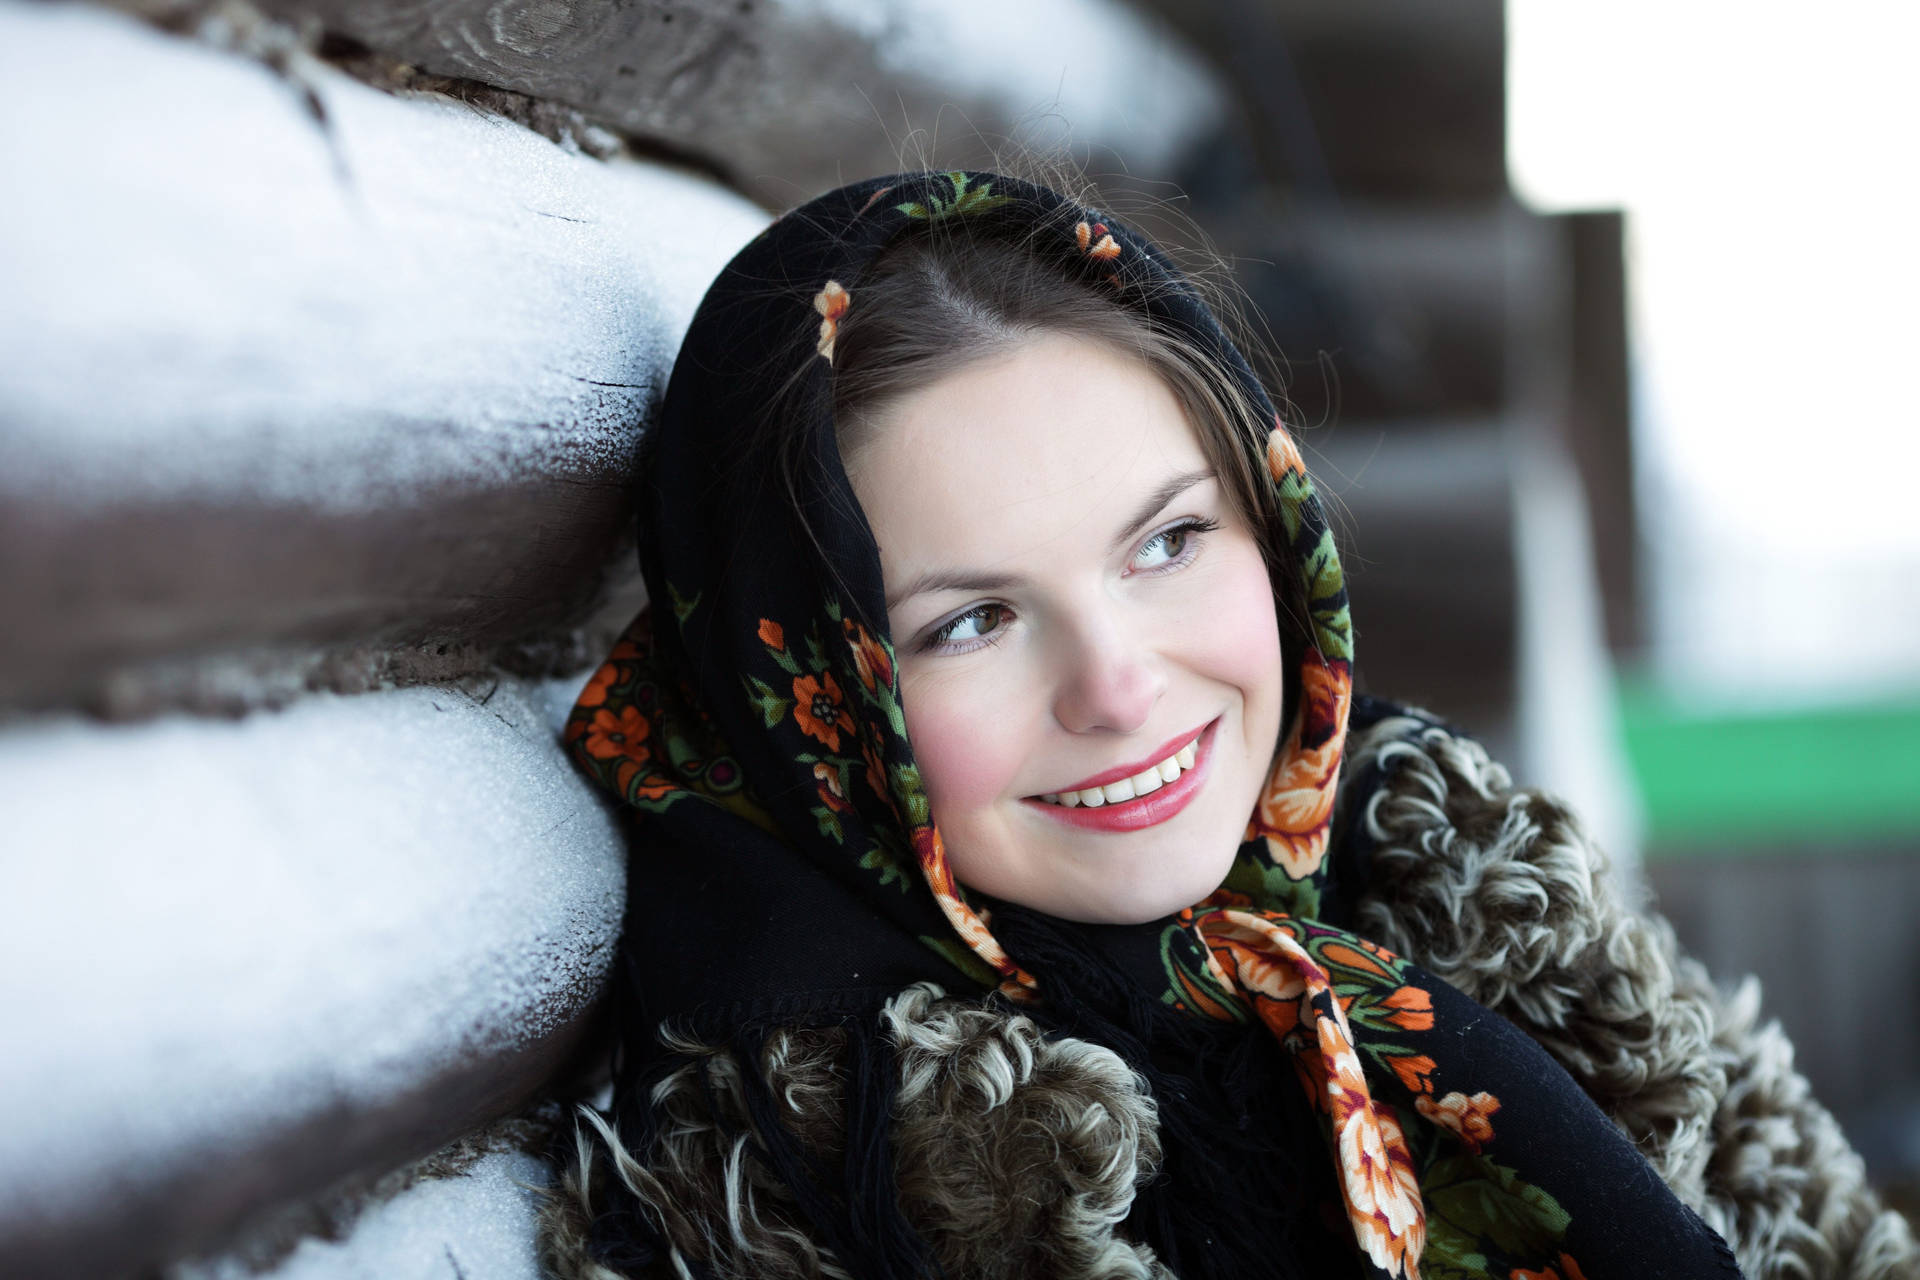 Russian Girl Leaning Against Snowy Wall Wallpaper